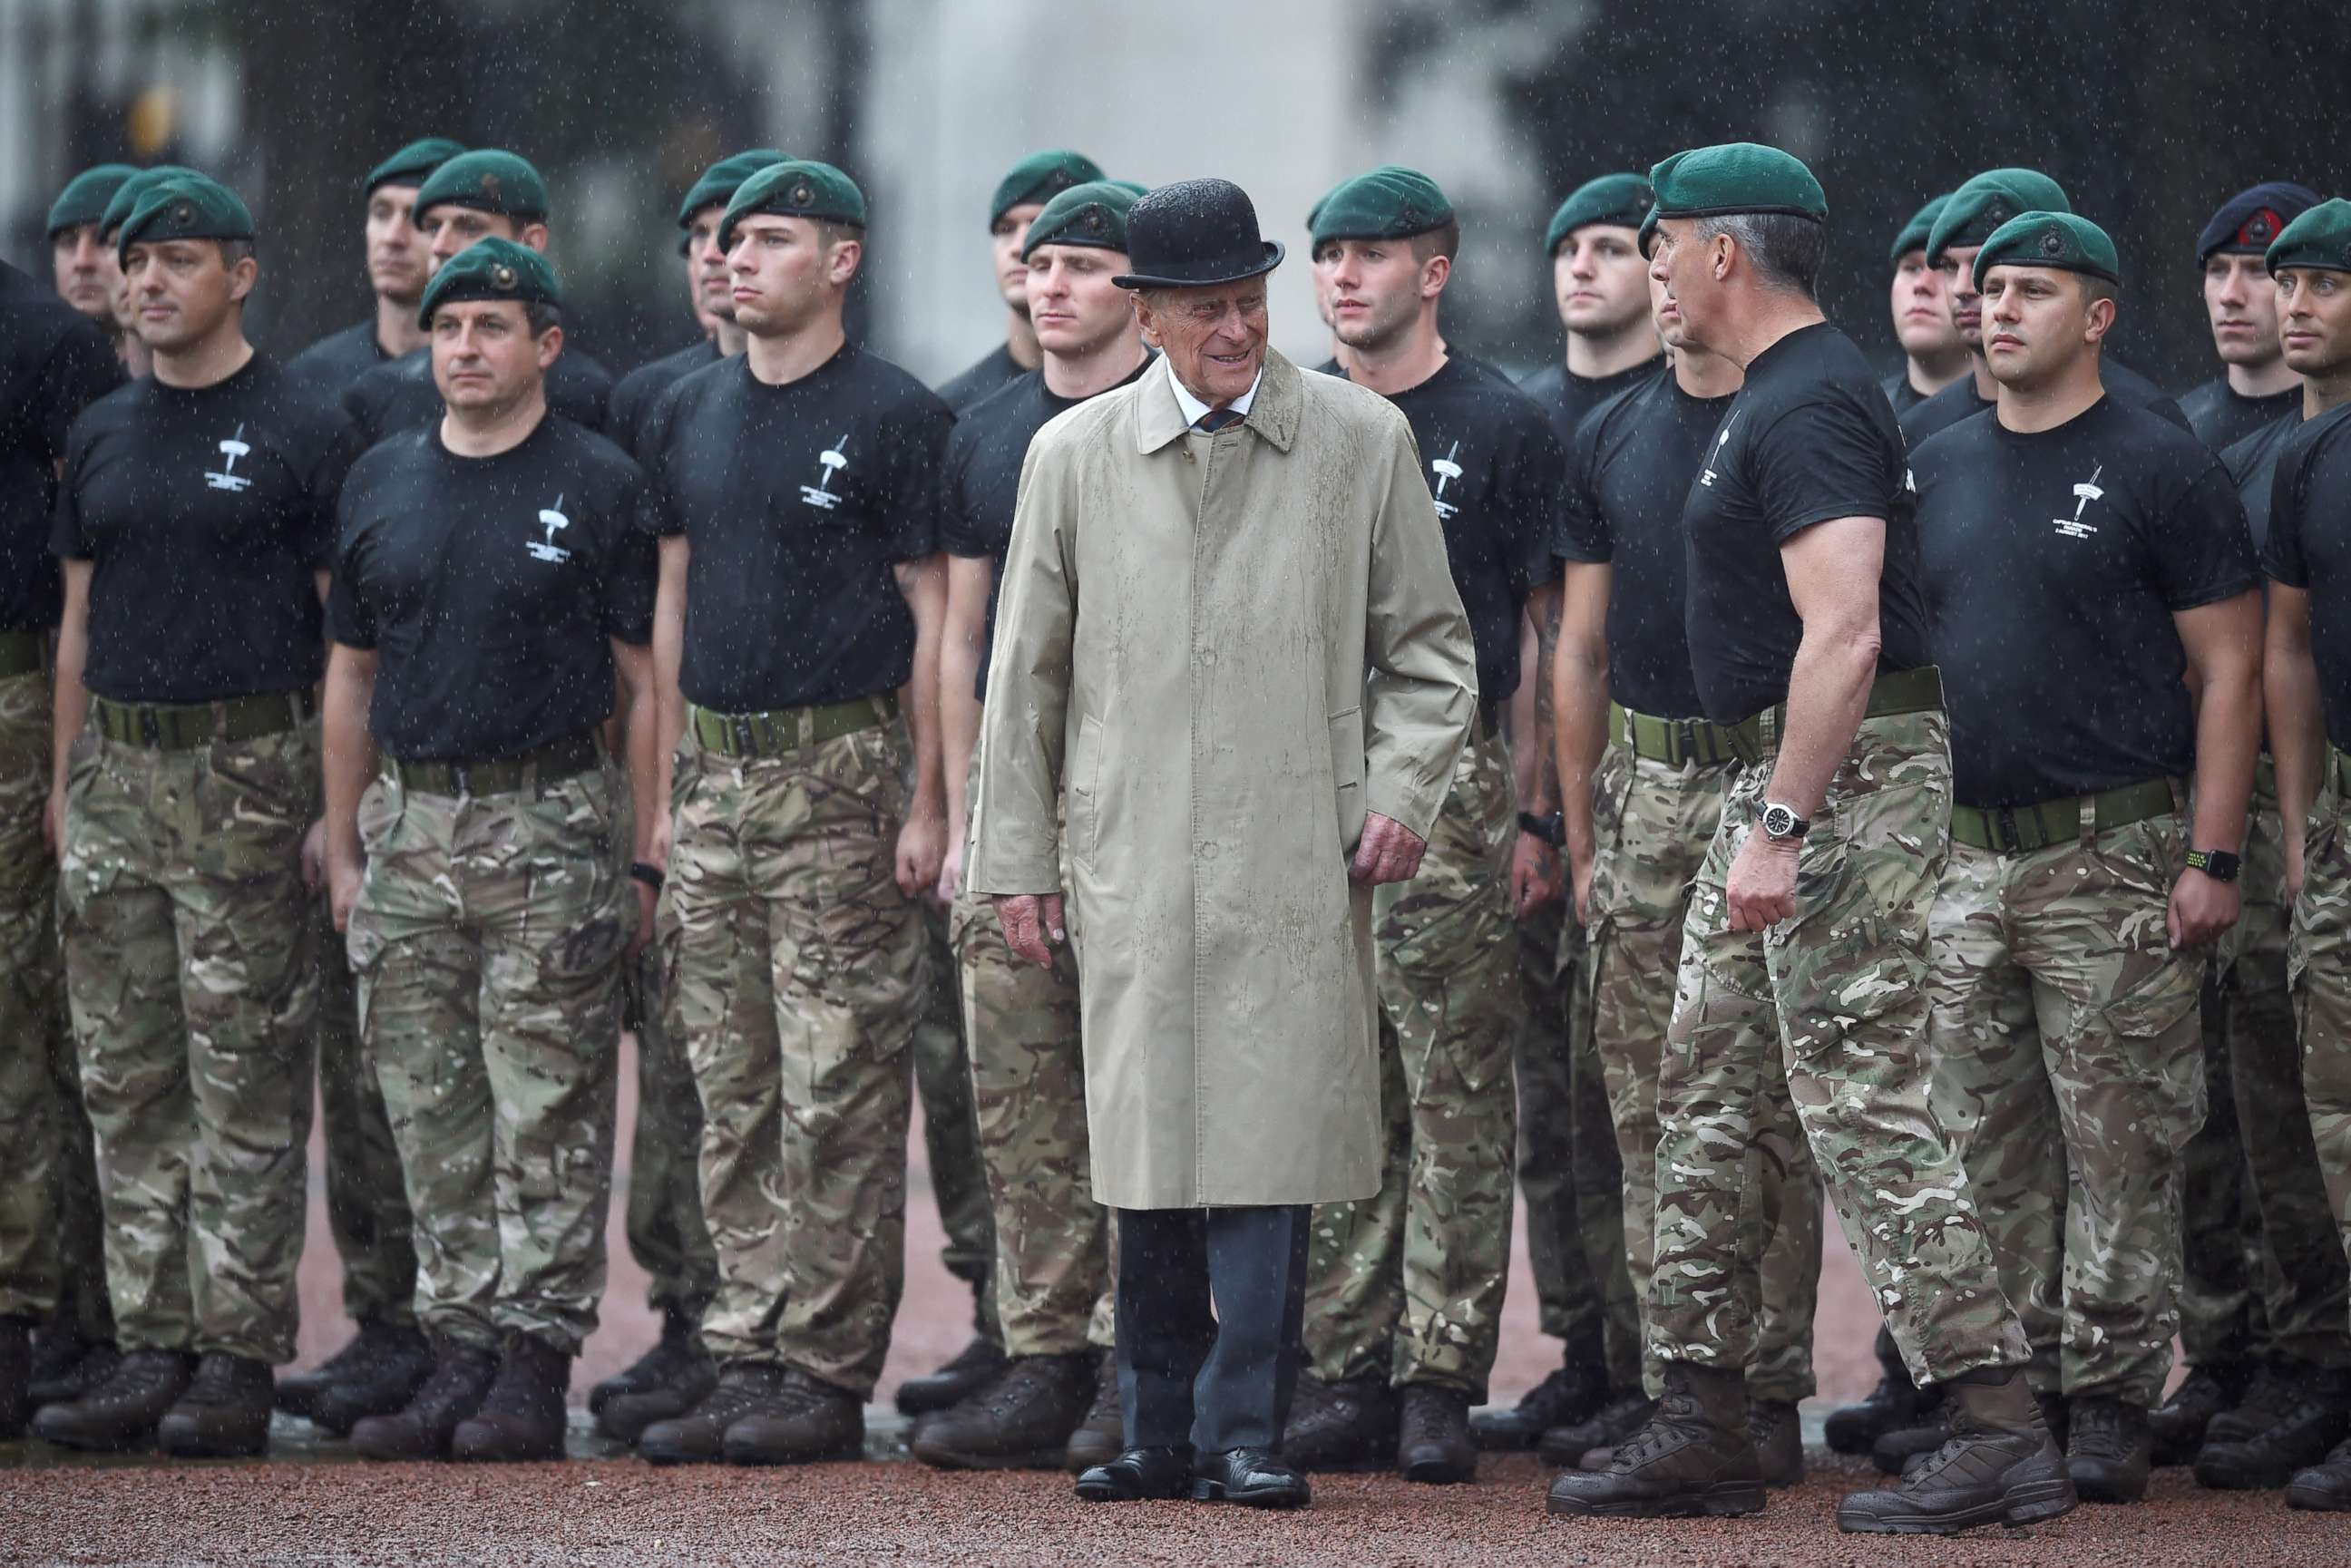 PHOTO: Britain's Prince Philip, in his role as Captain General, Royal Marines, attends a Parade to mark the finale of the 1664 Global Challenge, on the Buckingham Palace Forecourt, in central London, Britain Aug. 2, 2017.